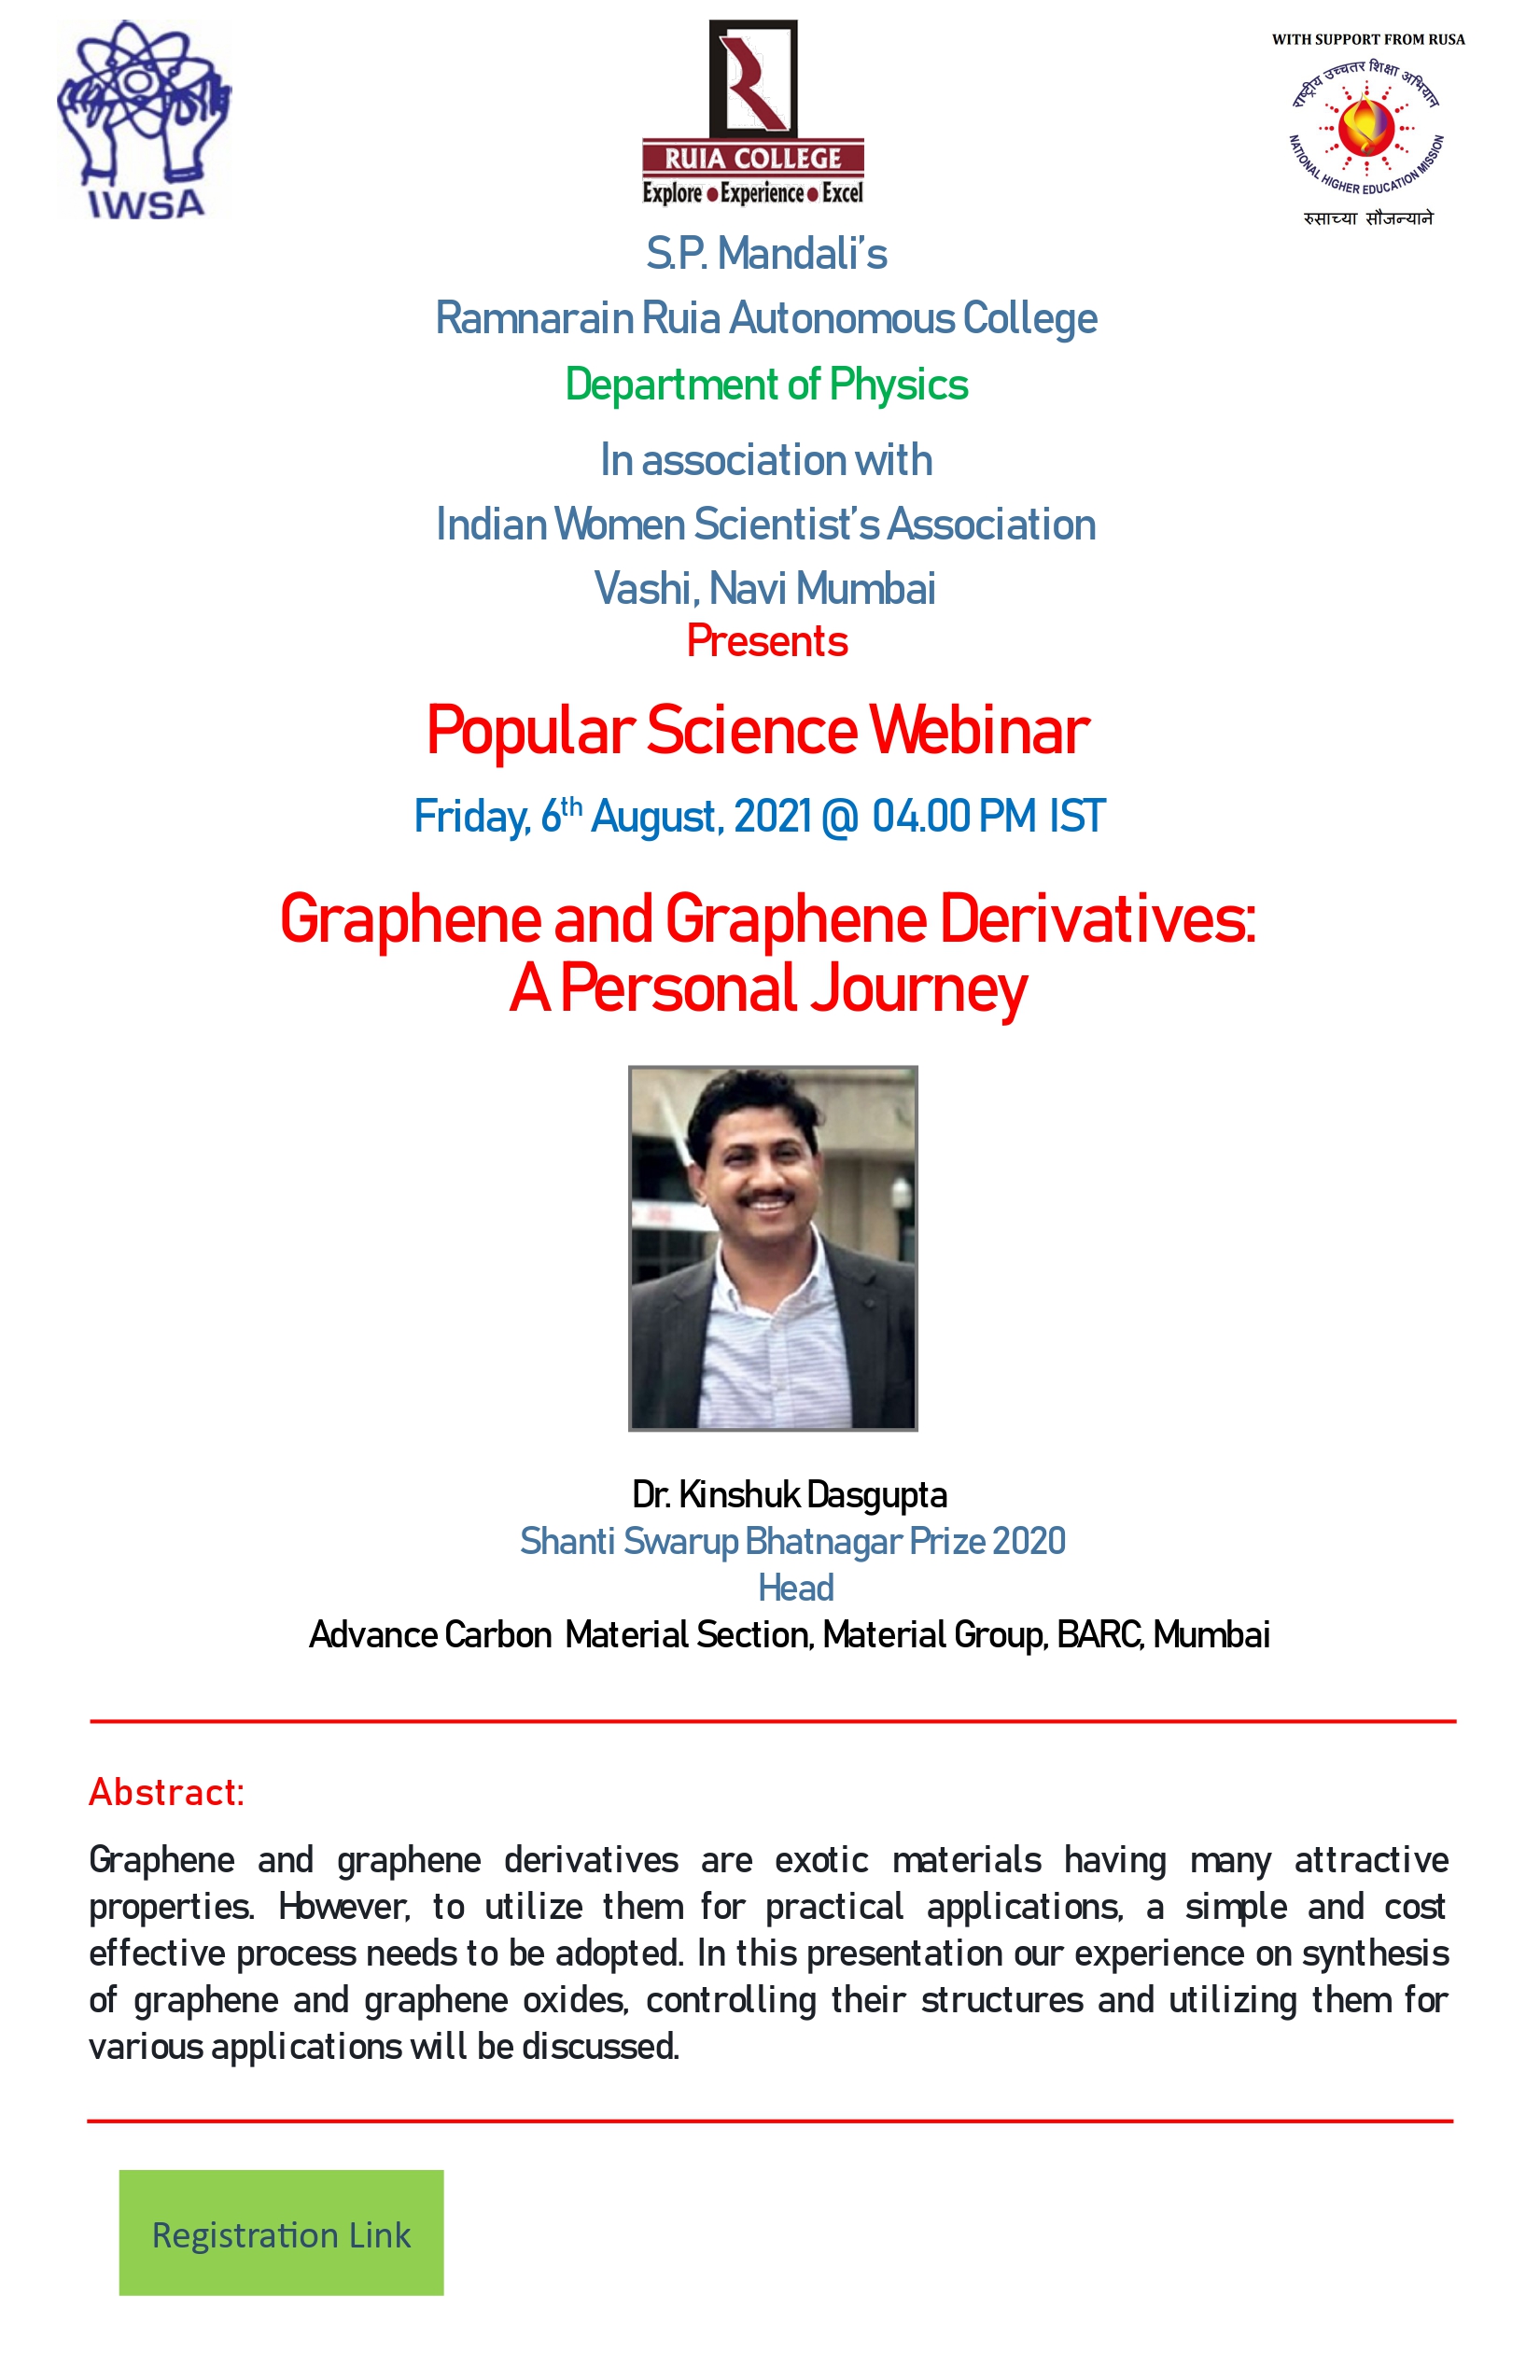 Graphene and Graphene Derivatives: A personal journey